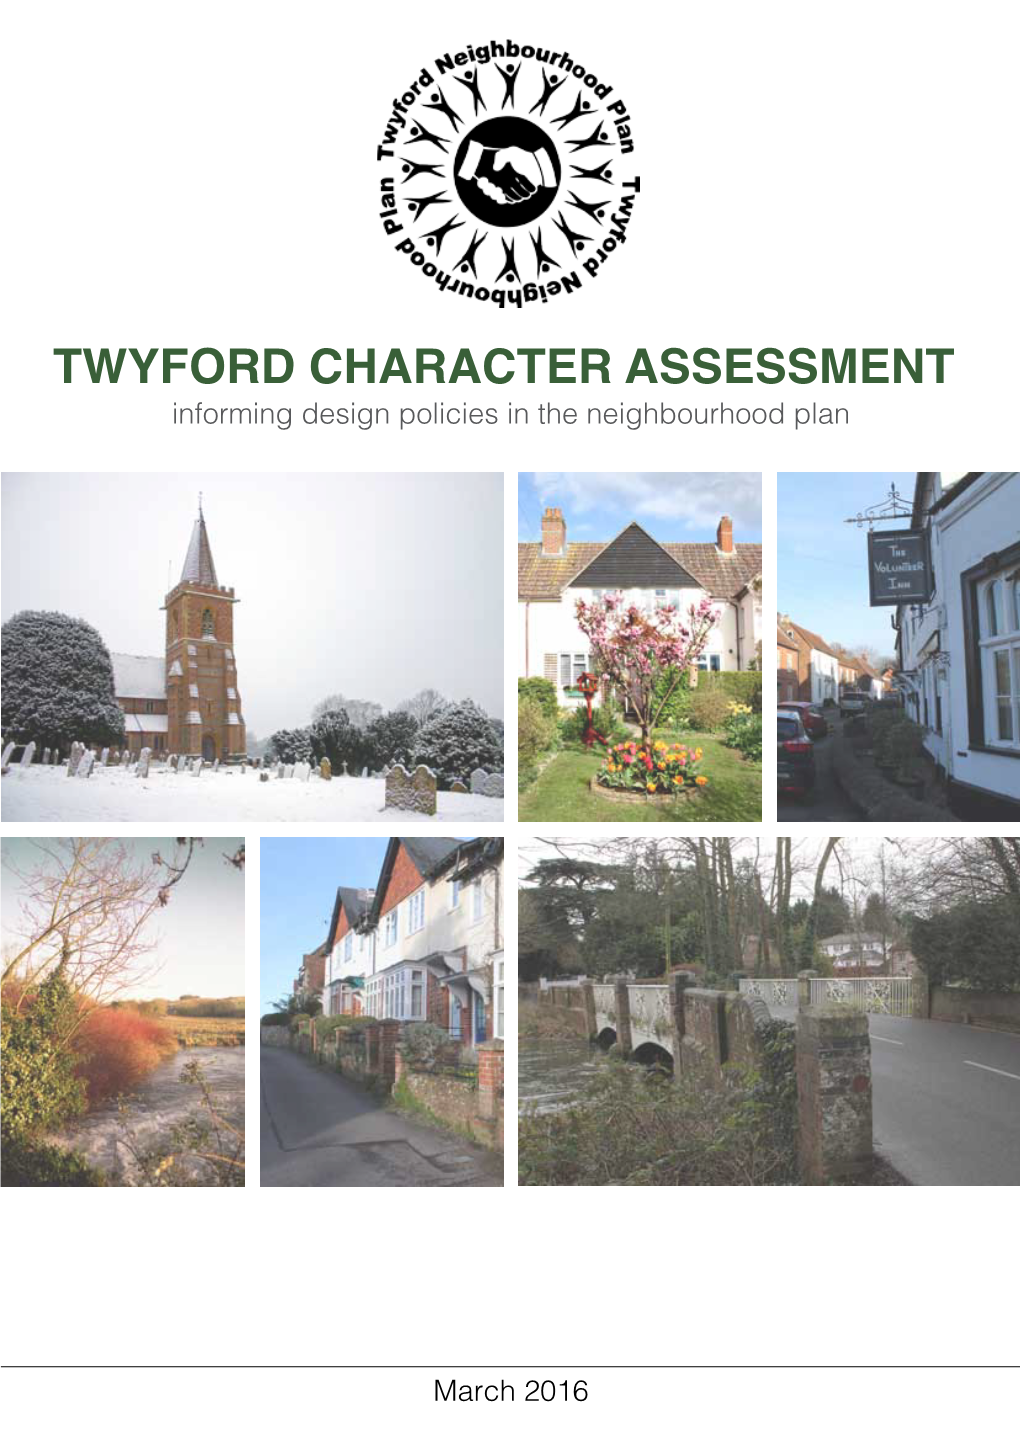 TWYFORD CHARACTER ASSESSMENT Informing Design Policies in the Neighbourhood Plan